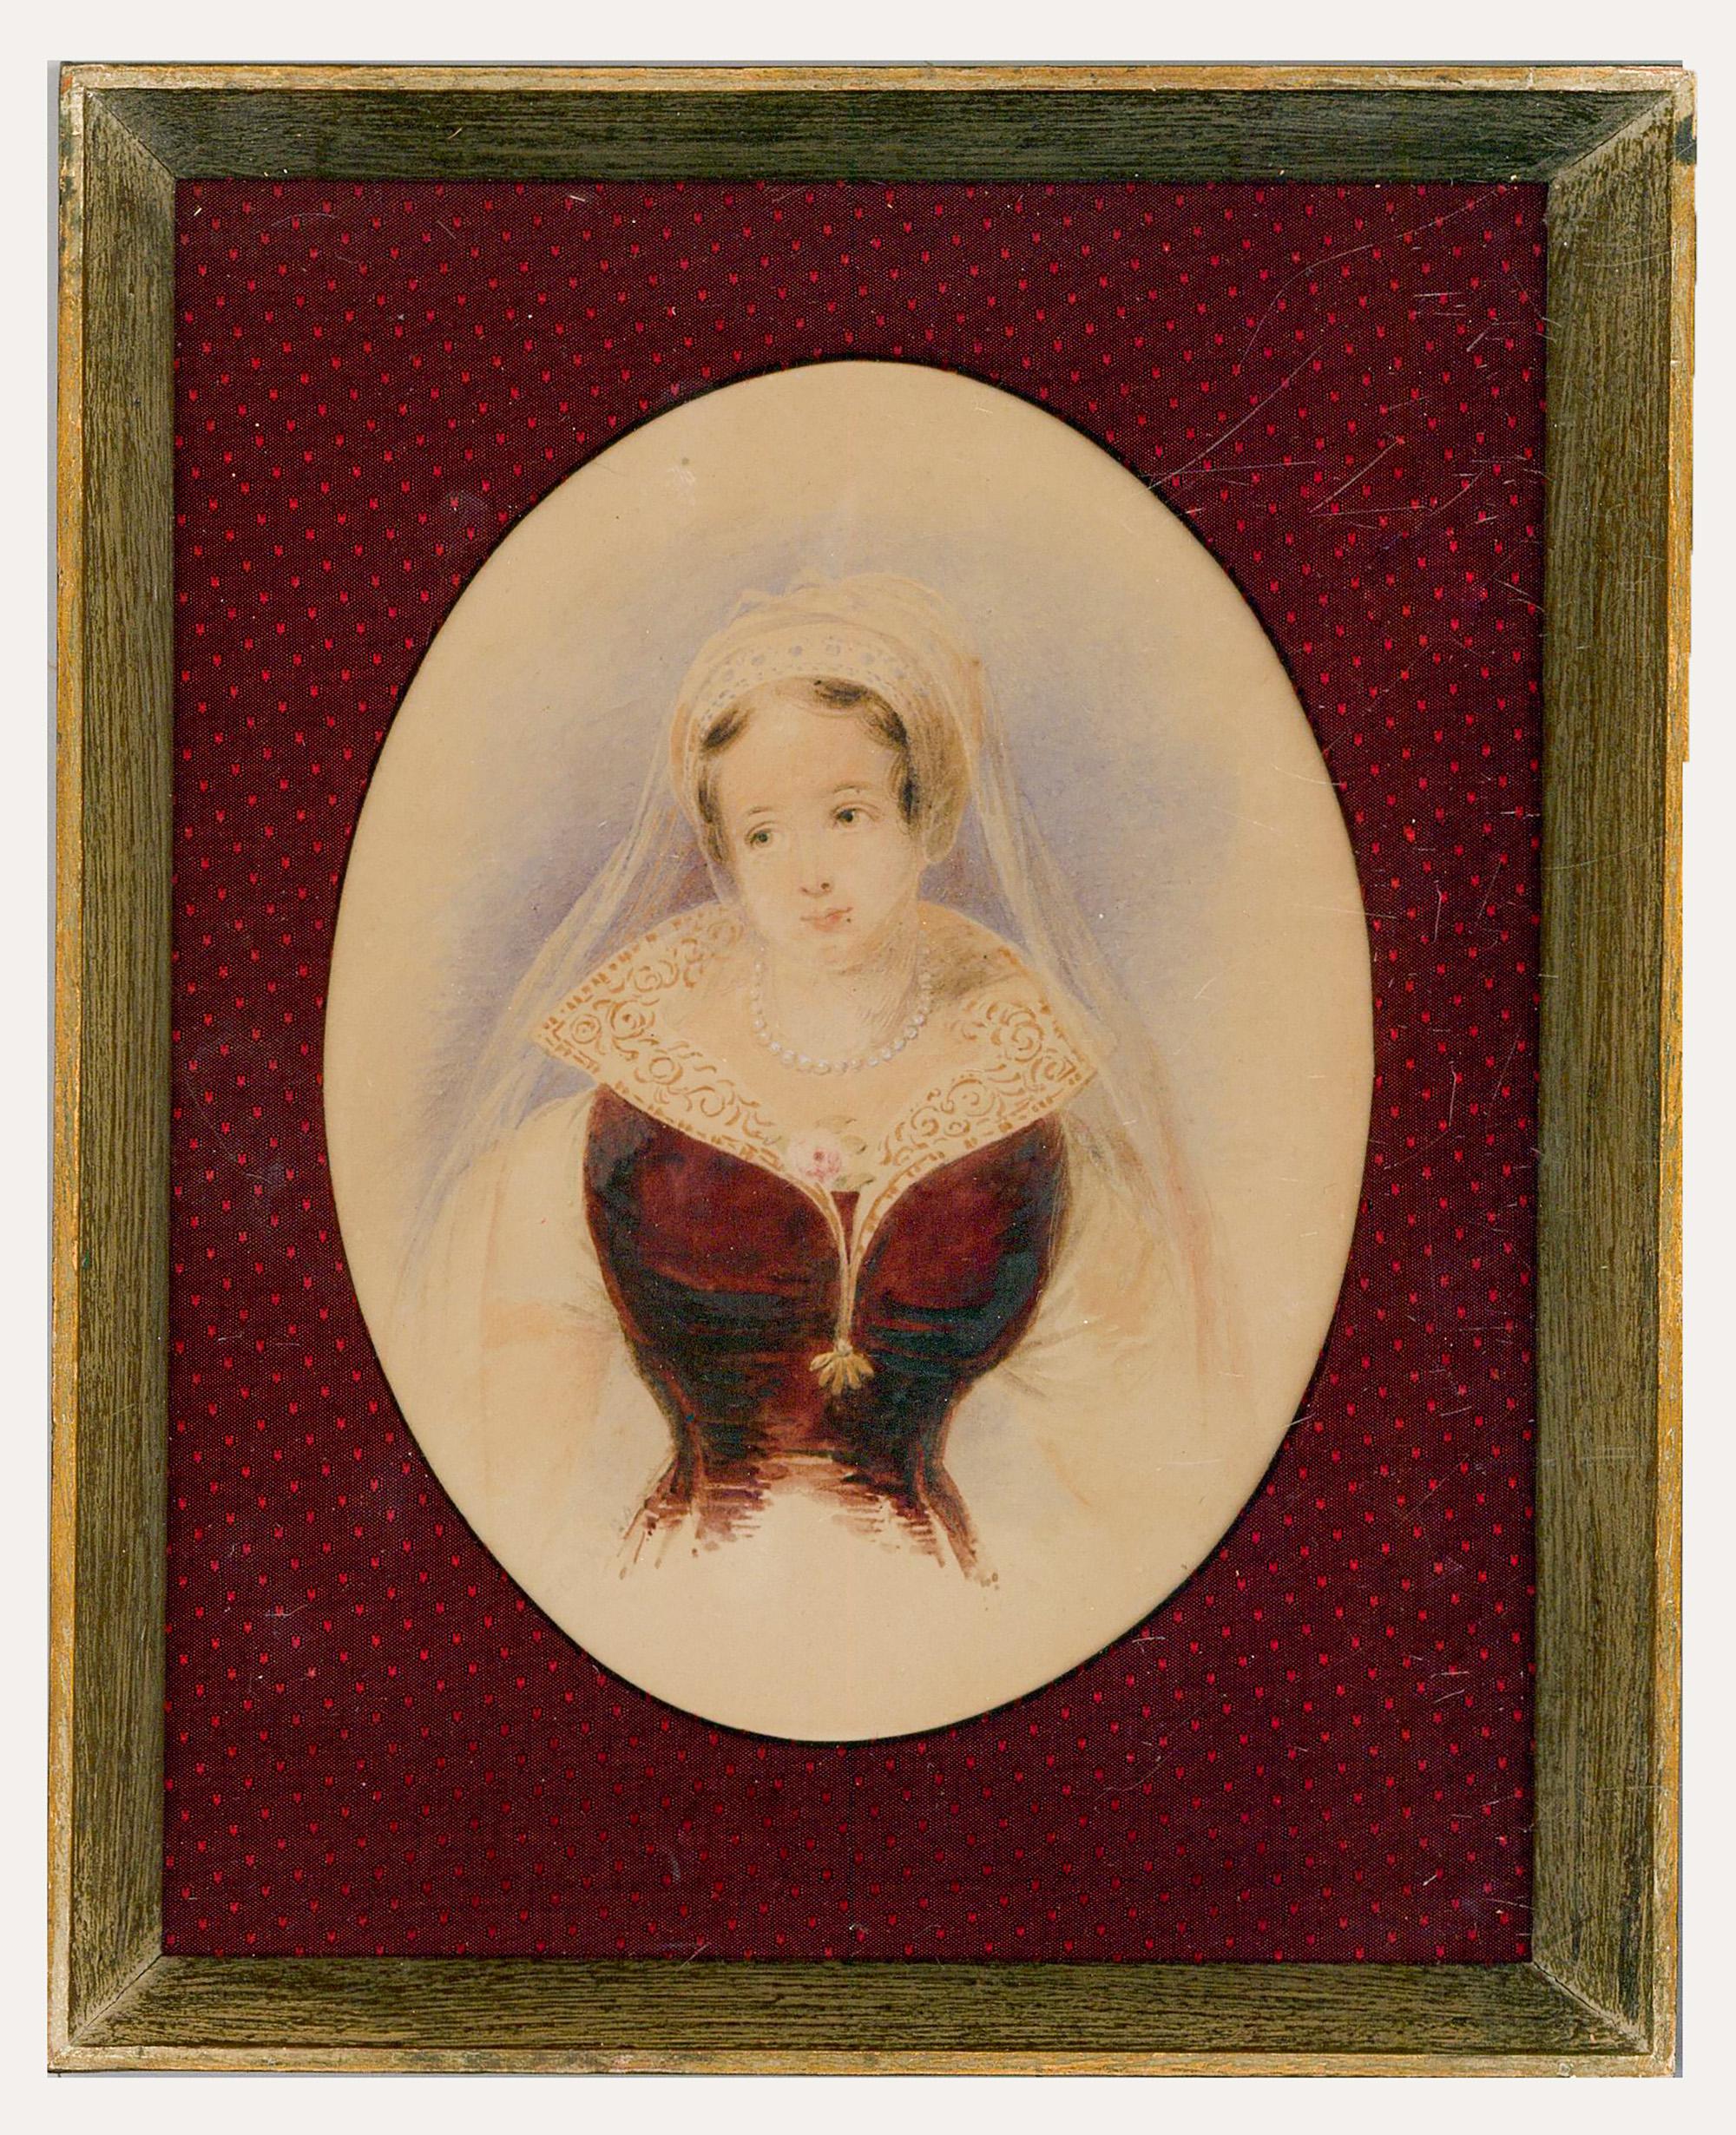 A fine and delicate watercolour portrait of a beautiful young woman in a Tudor style dress with elaborate lace fan collar. The artist has signed to the lower left (this has faded significantly with age, however, Sulis Fine Art acquired this piece